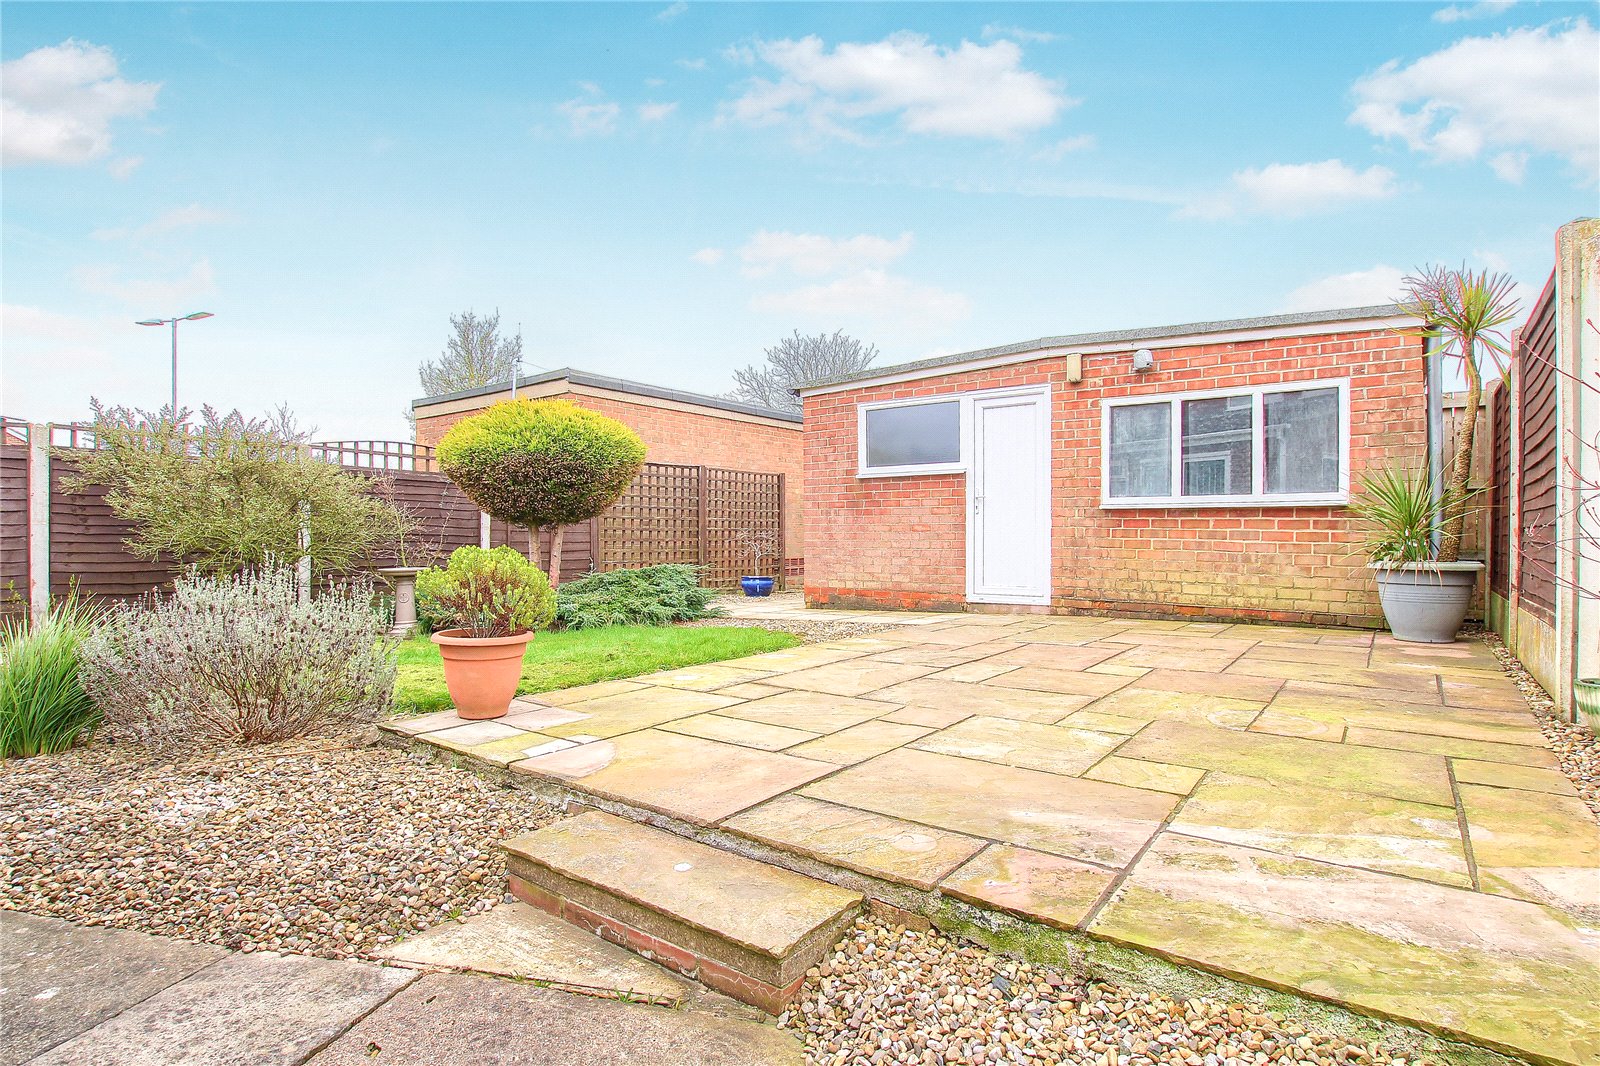 4 bed house for sale in Wolviston Court, Billingham  - Property Image 20